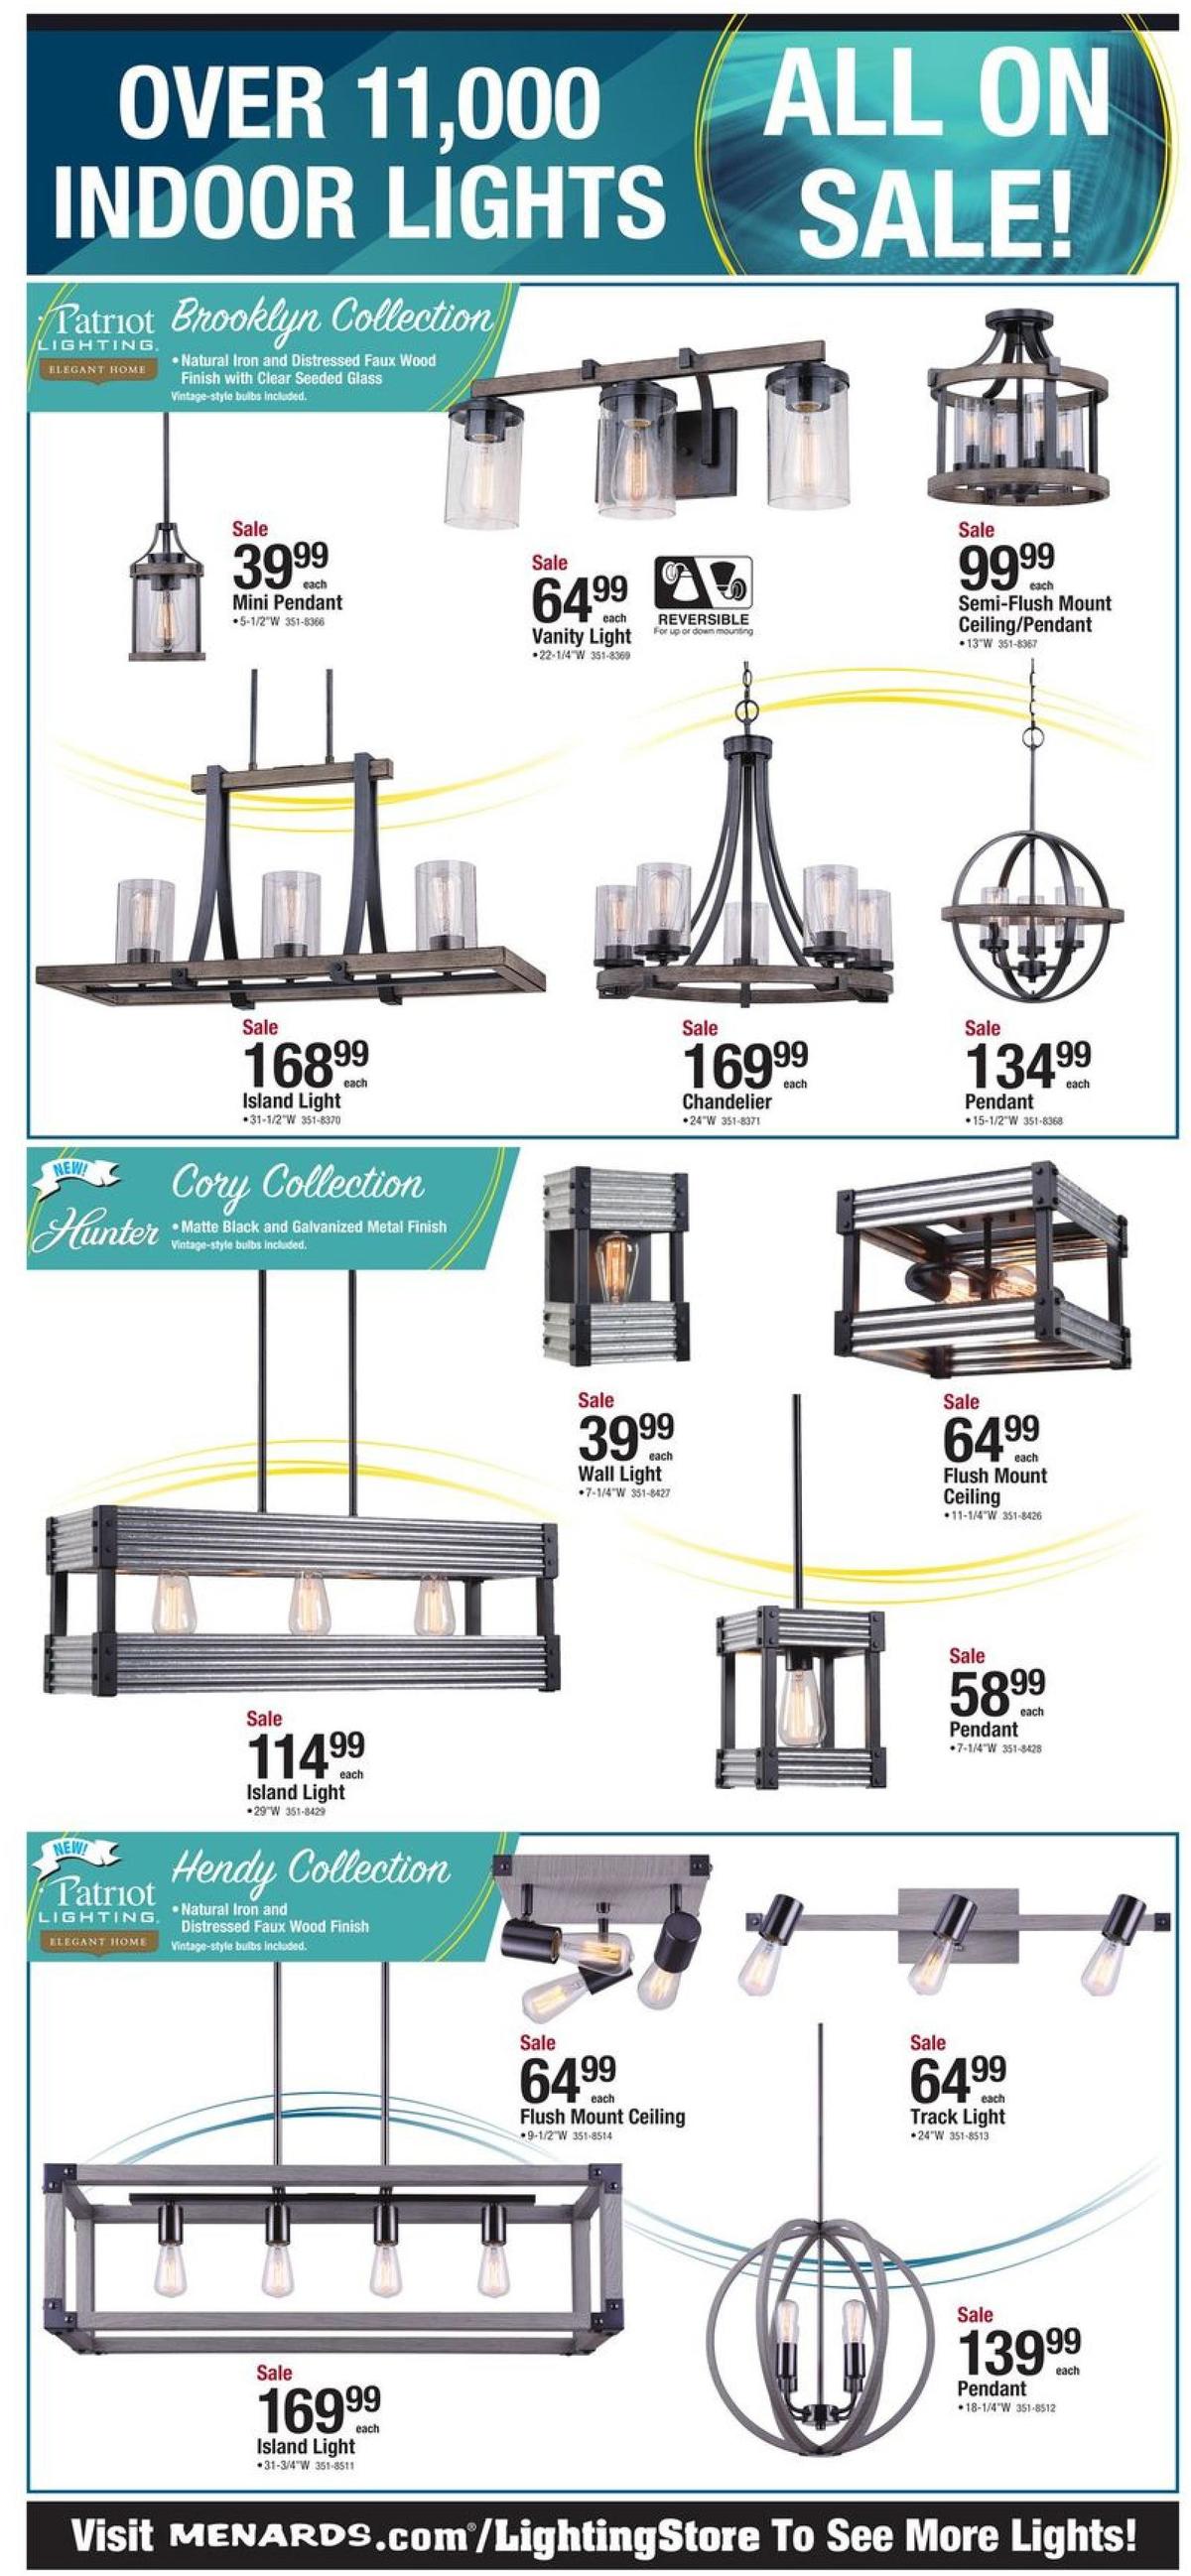 Menards Great Lighting Sale Weekly Ad from January 1